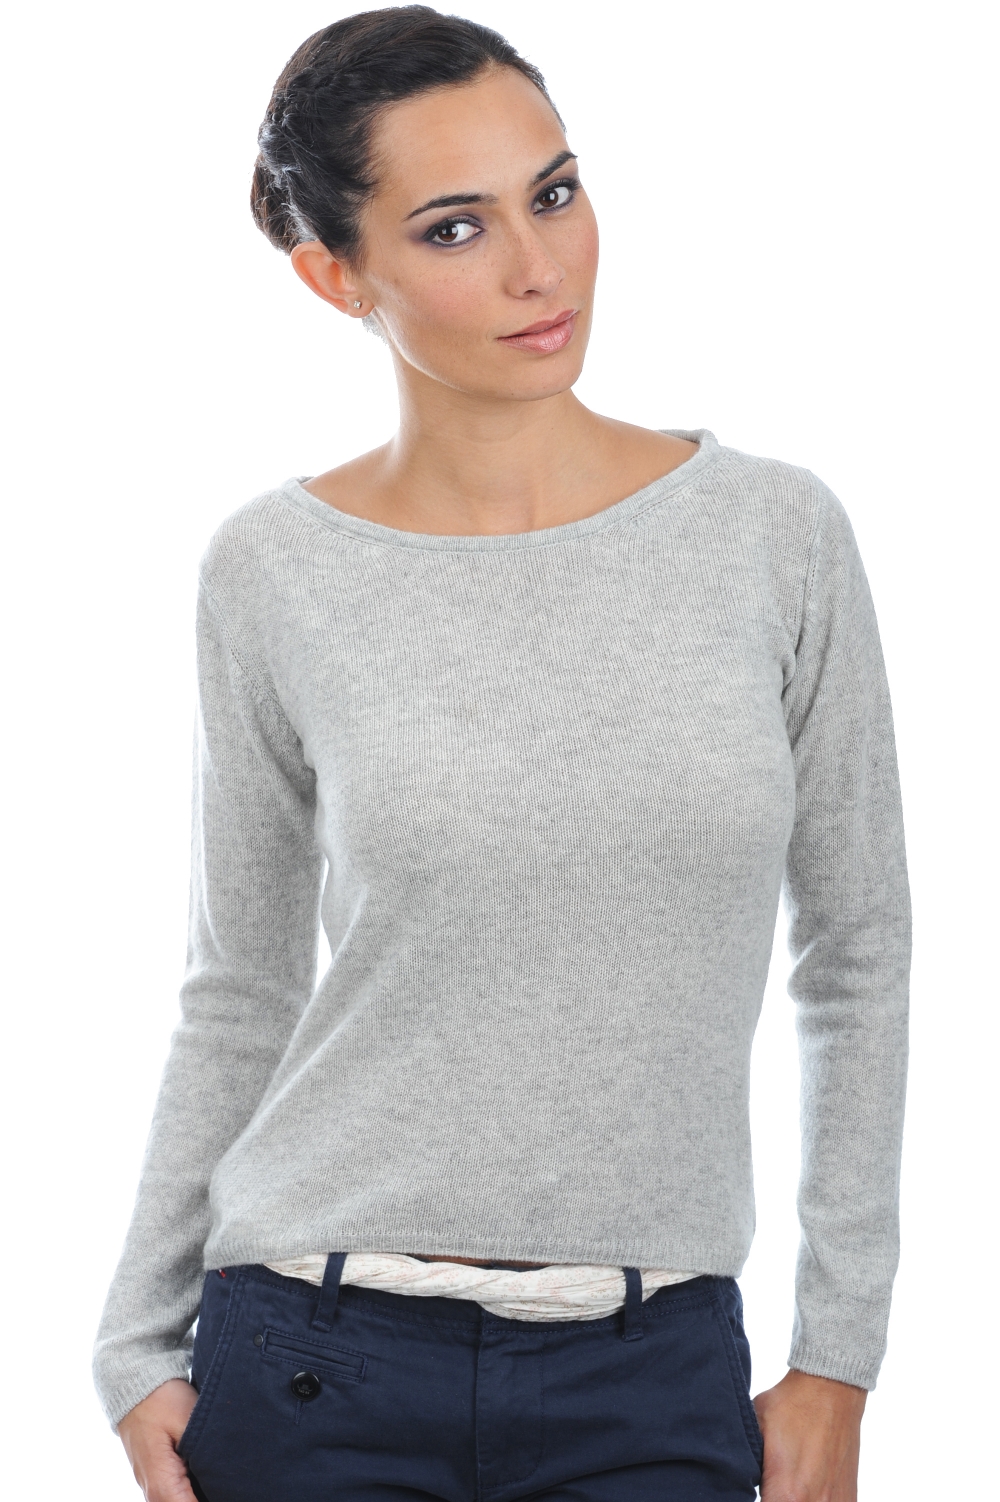 Cashmere ladies basic sweaters at low prices caleen flanelle chine 3xl